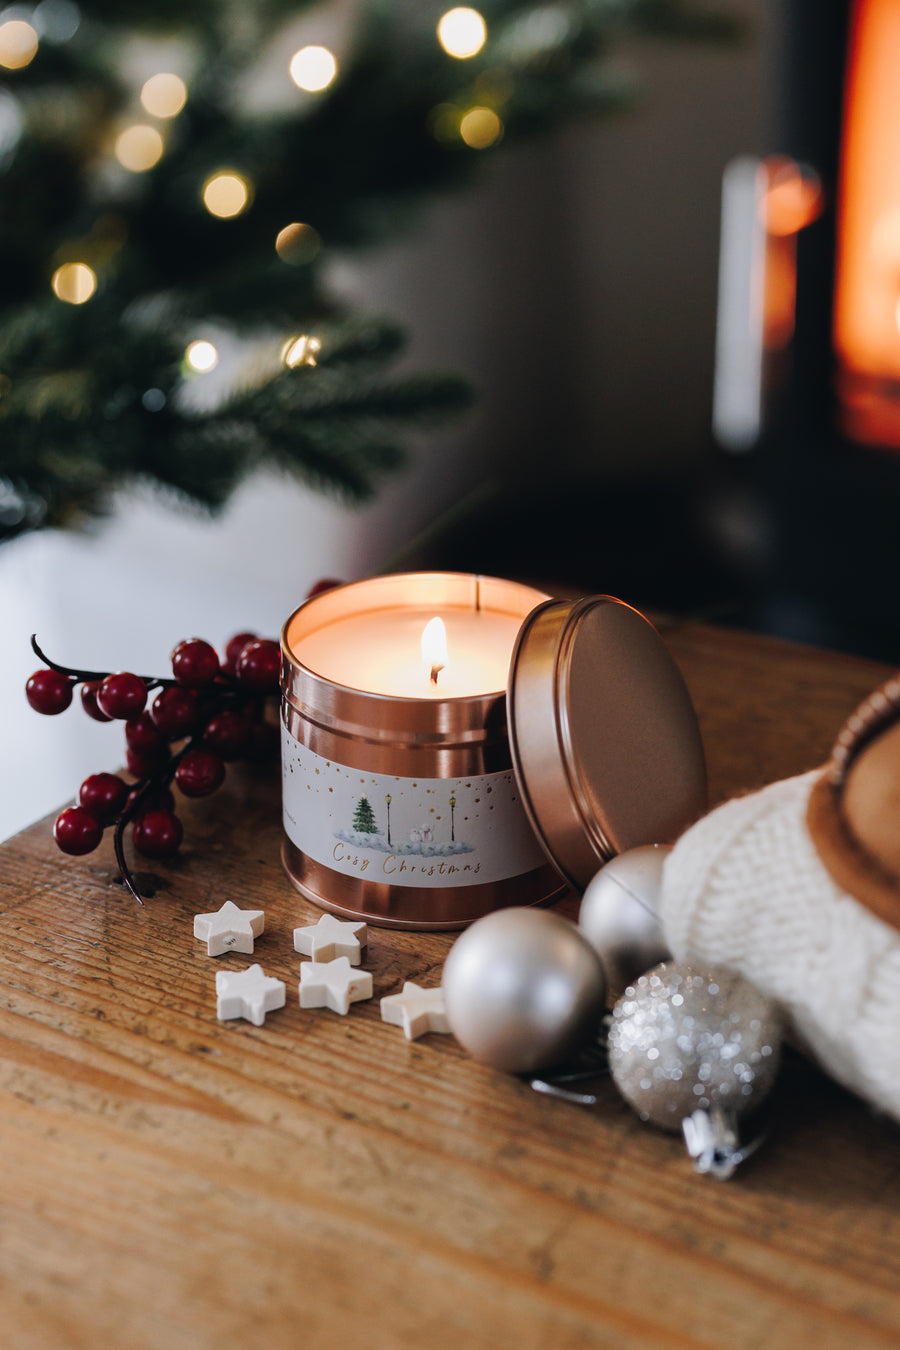 Cosy Christmas | Coconut Wax Tin Candle